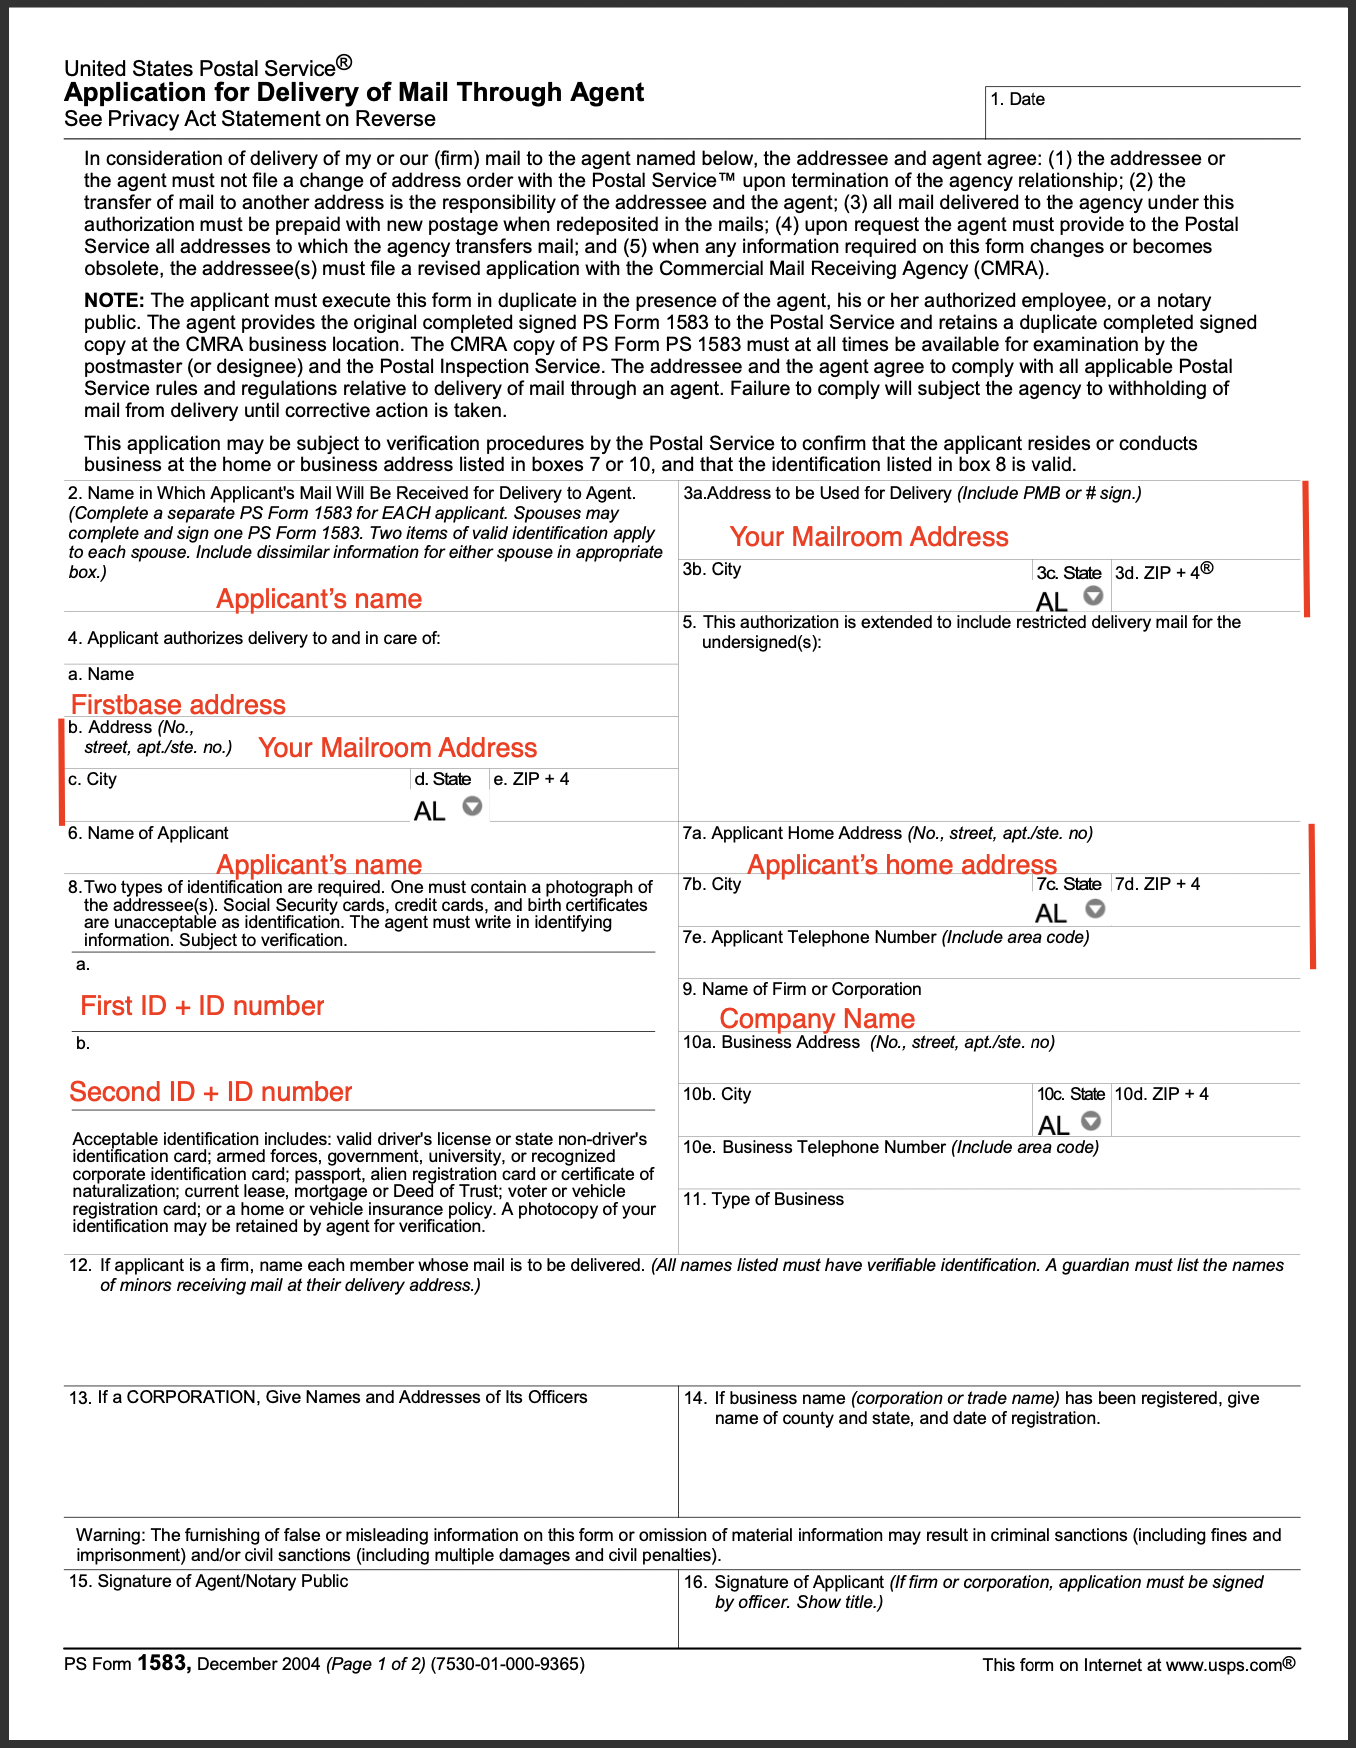 Understanding The USPS 1583 Form Firstbase io